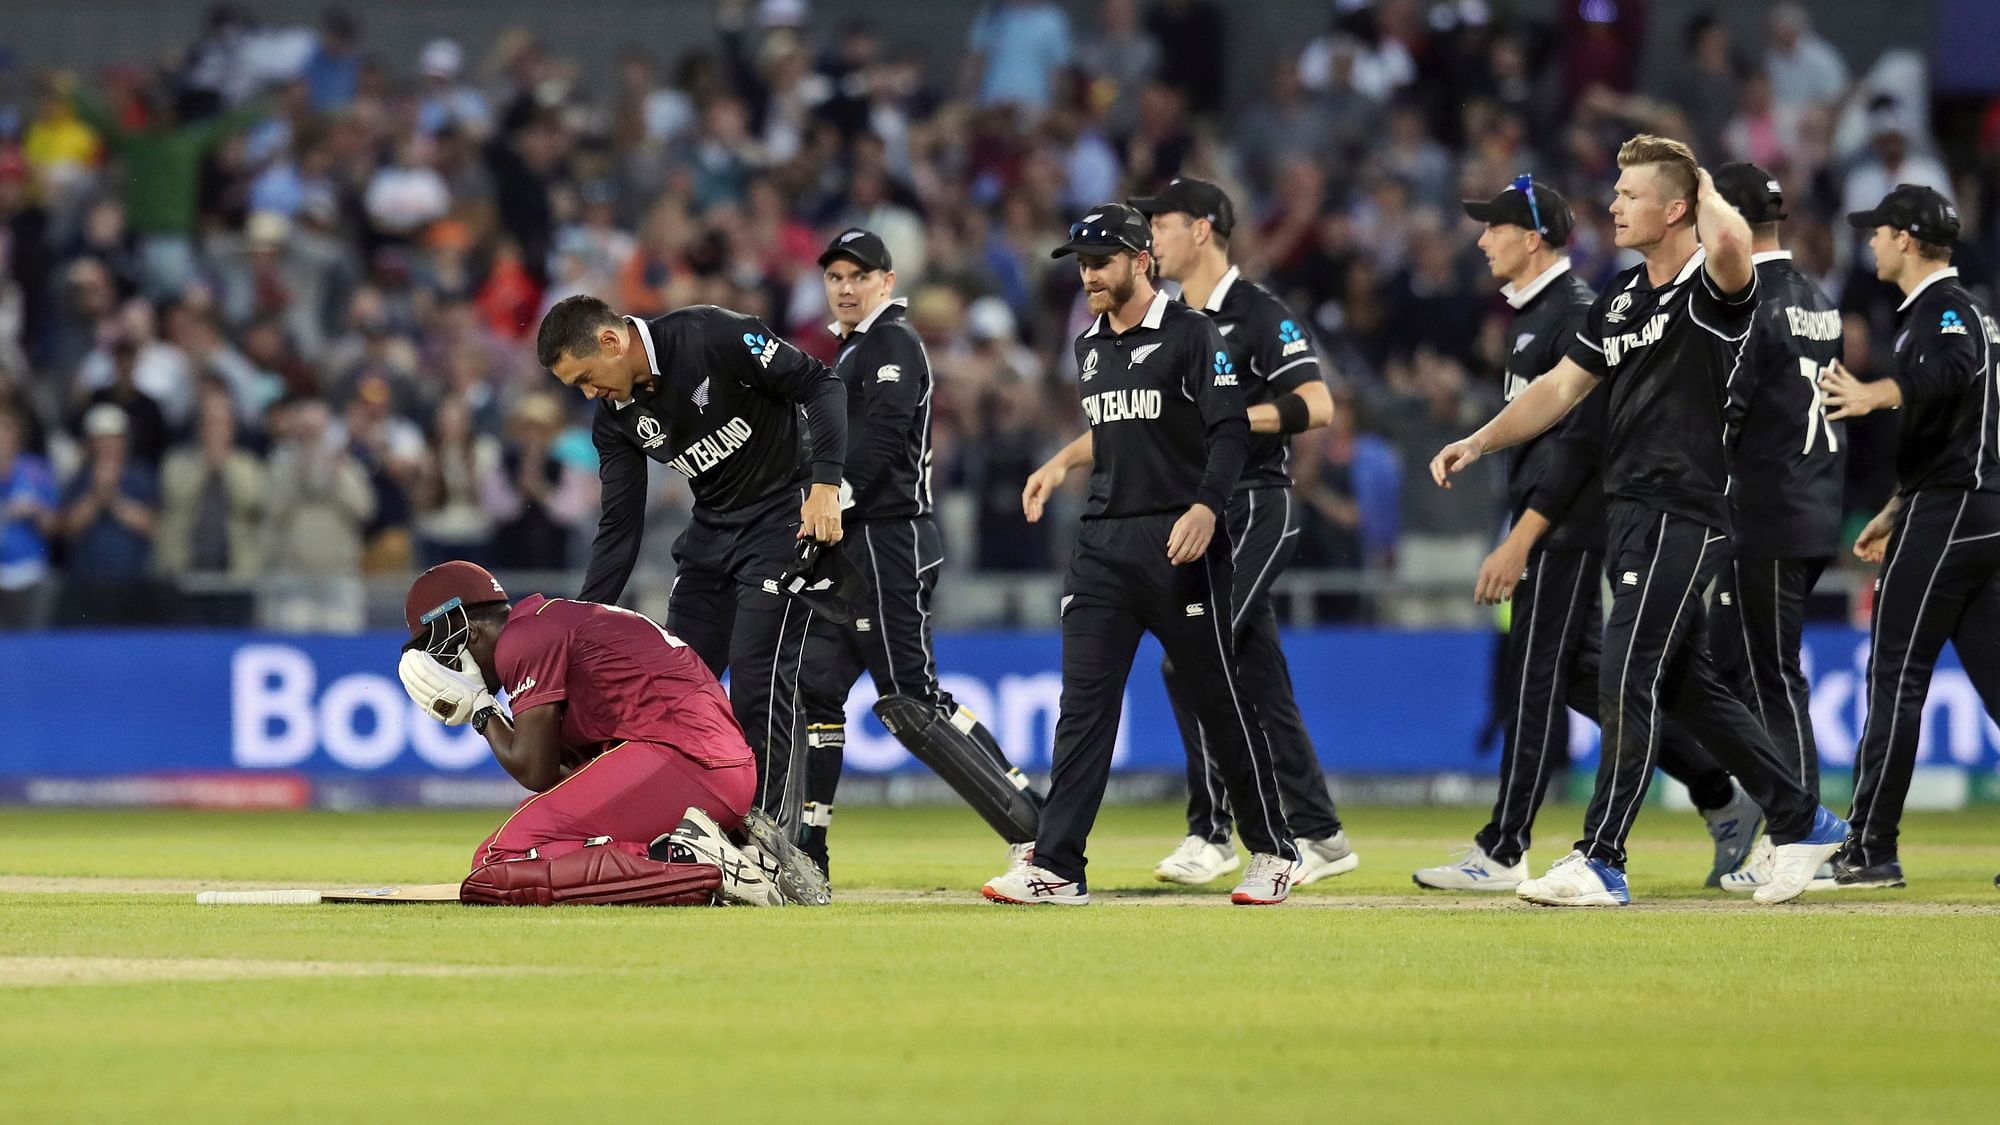 New Zealand’s Ross Taylor consoles West Indies’ Carlos Brathwaite at the end of the Cricket World Cup match between New Zealand and West Indies at Old Trafford.